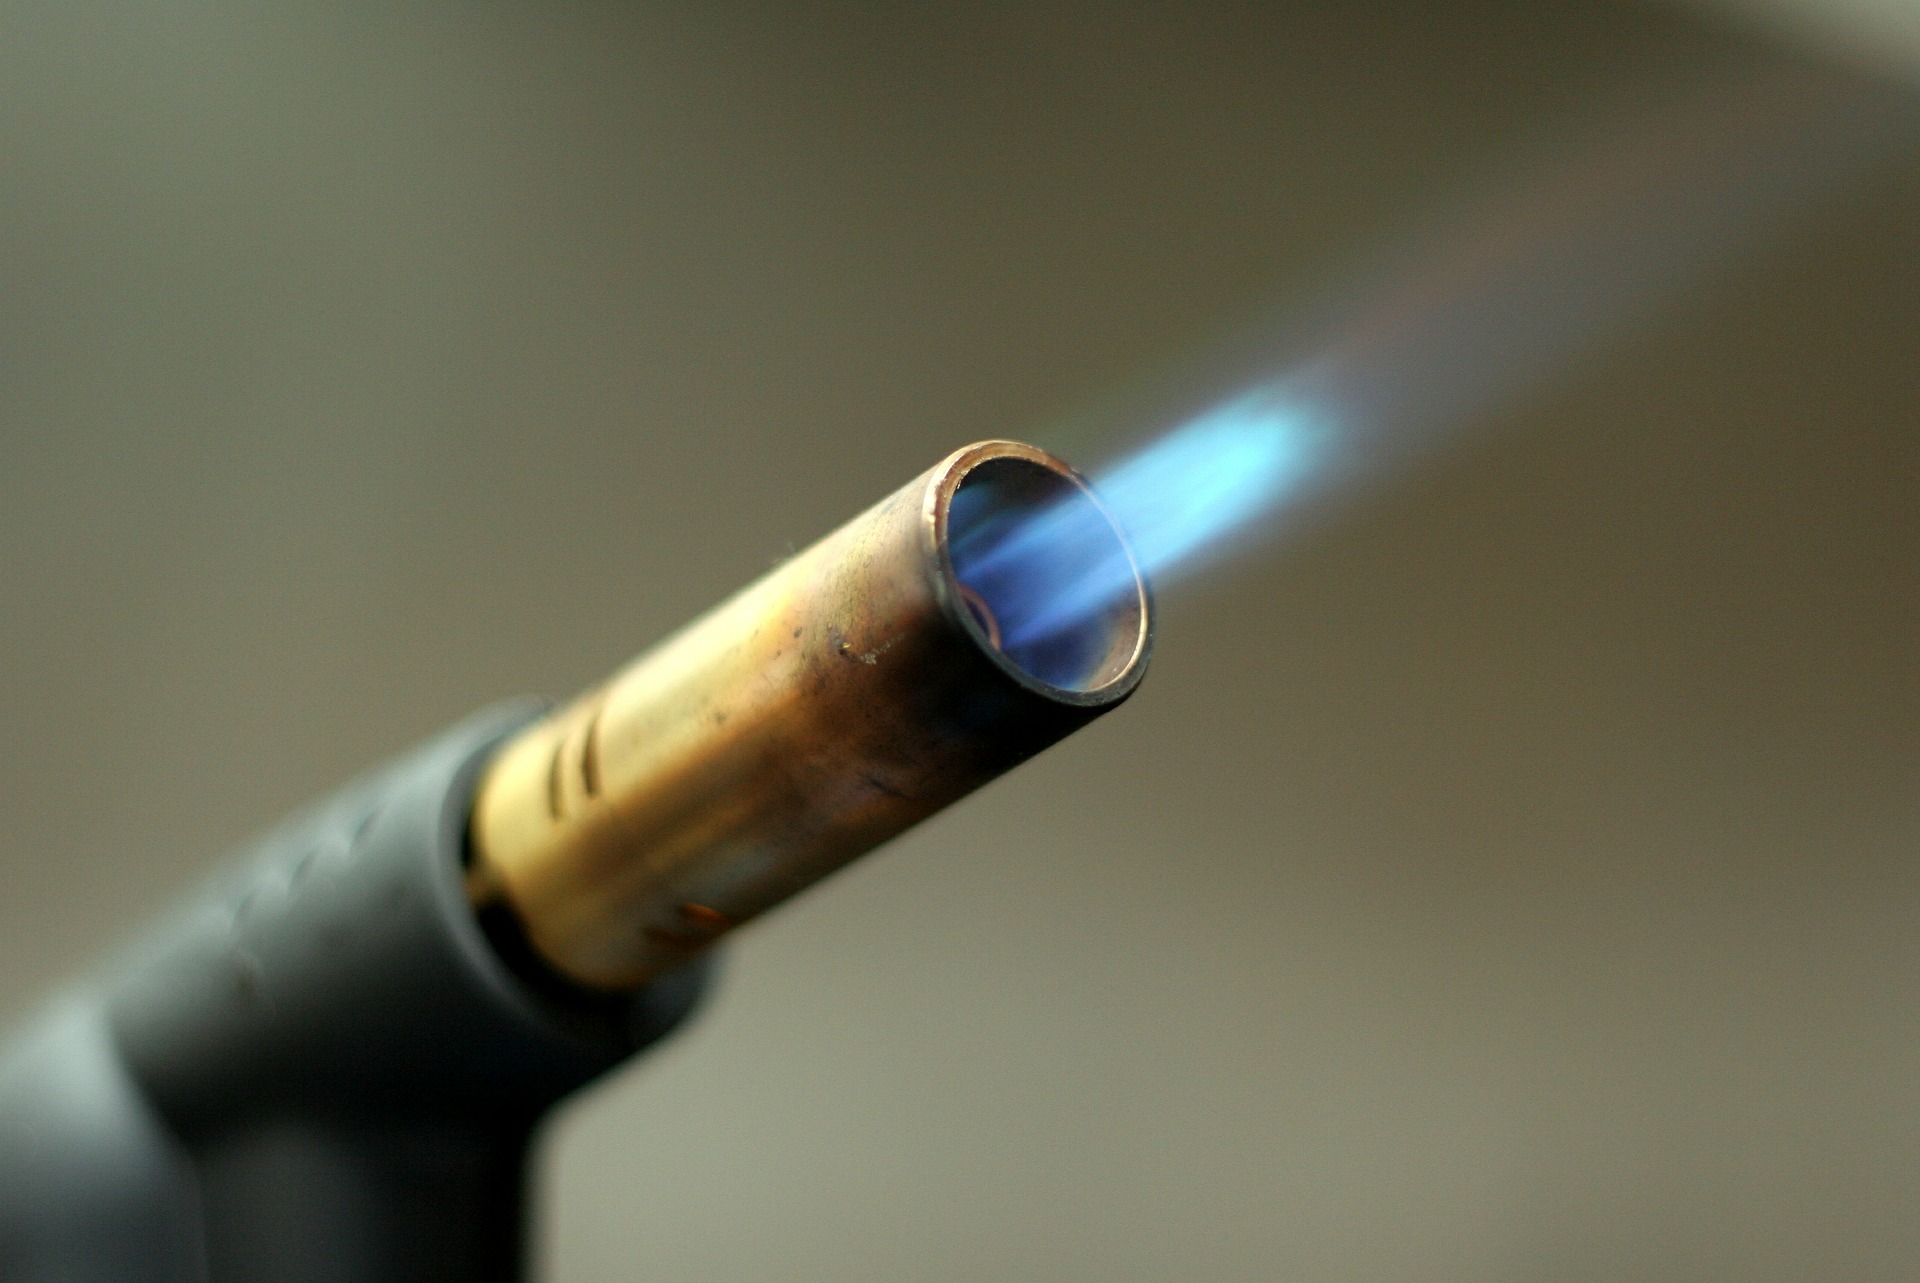 Uses for a Butane Gas Torch